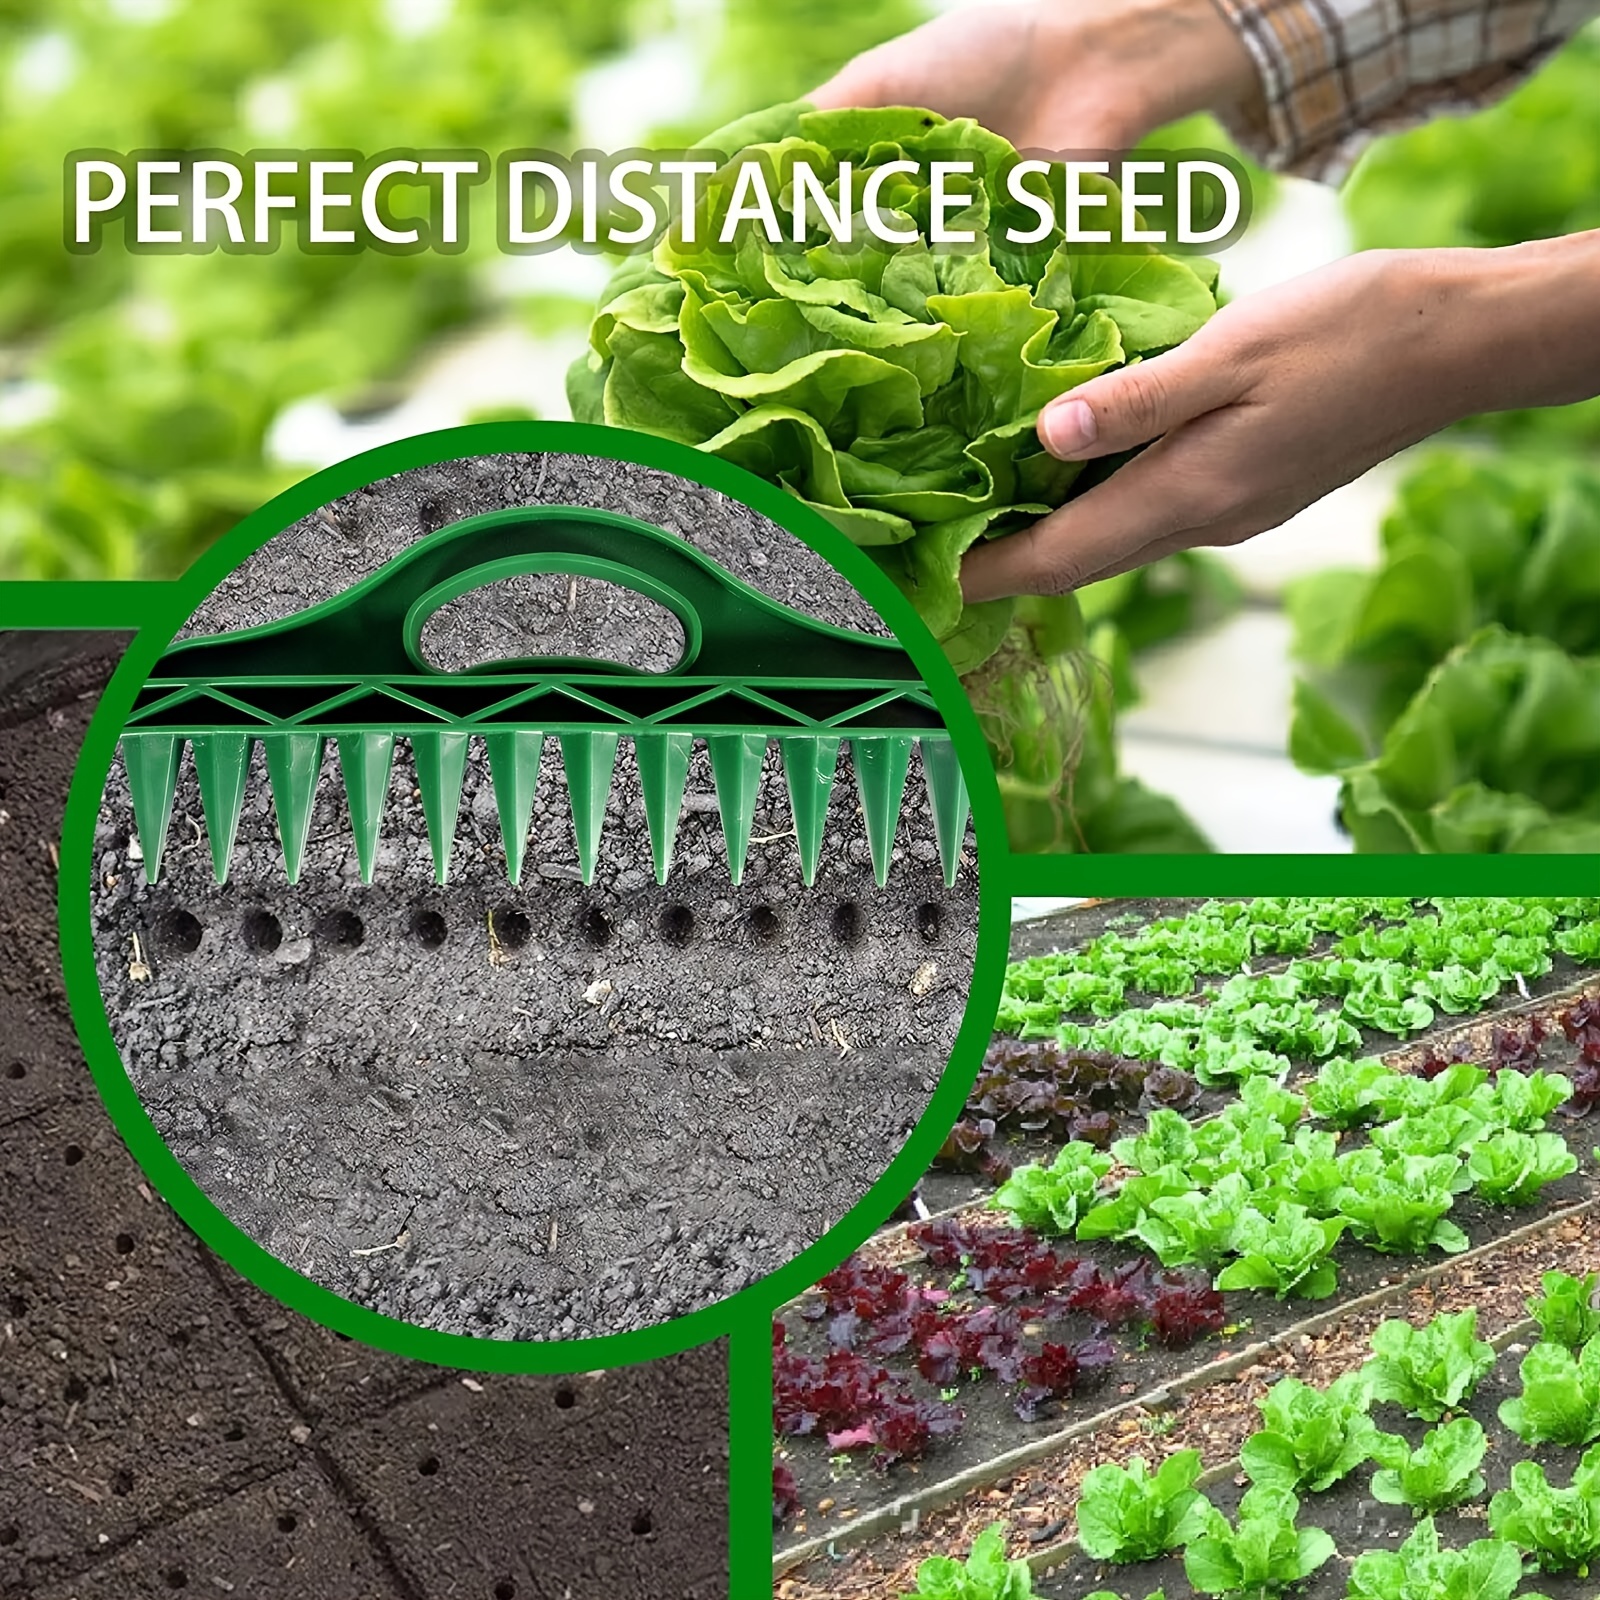 Gardinnovations 24-Hole Soil Digger and Seed Spacer for Planting Seeds |  New Garden Tool, Gift for Gardener